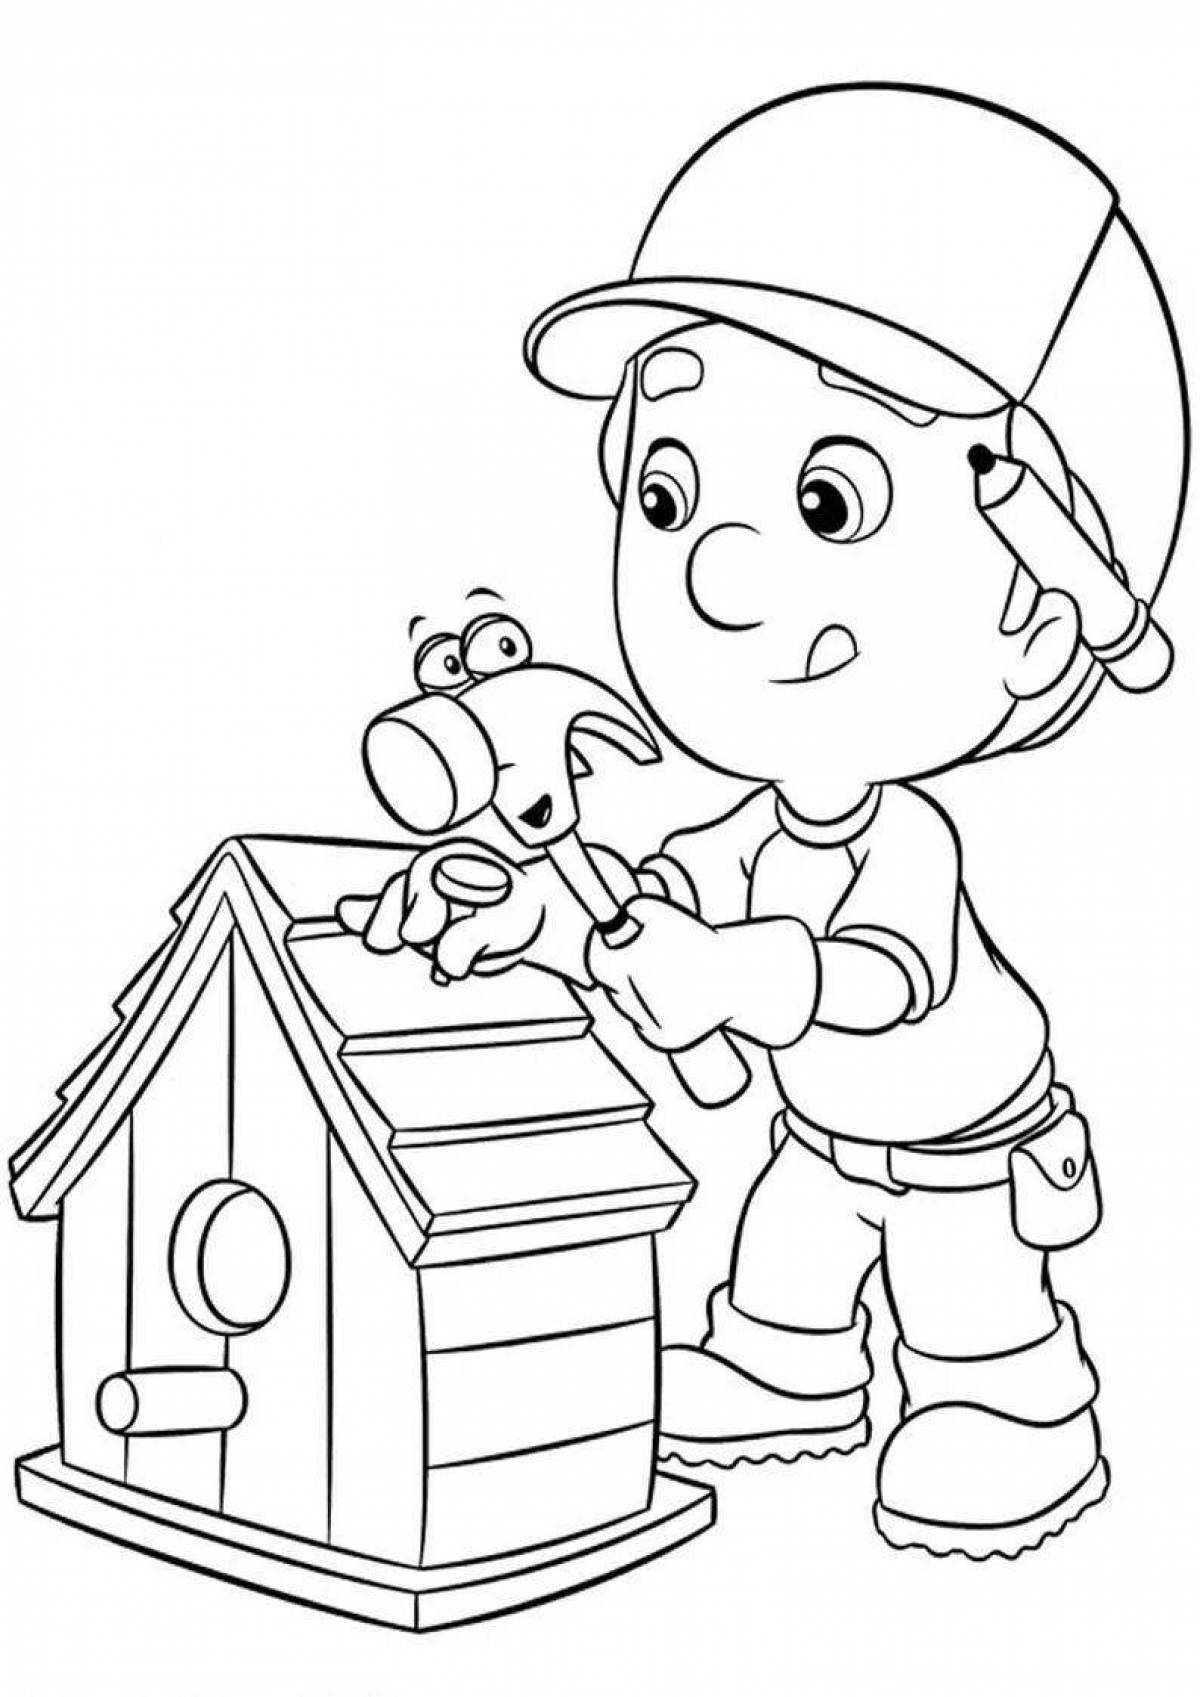 Coloring book happy carpenter for babies